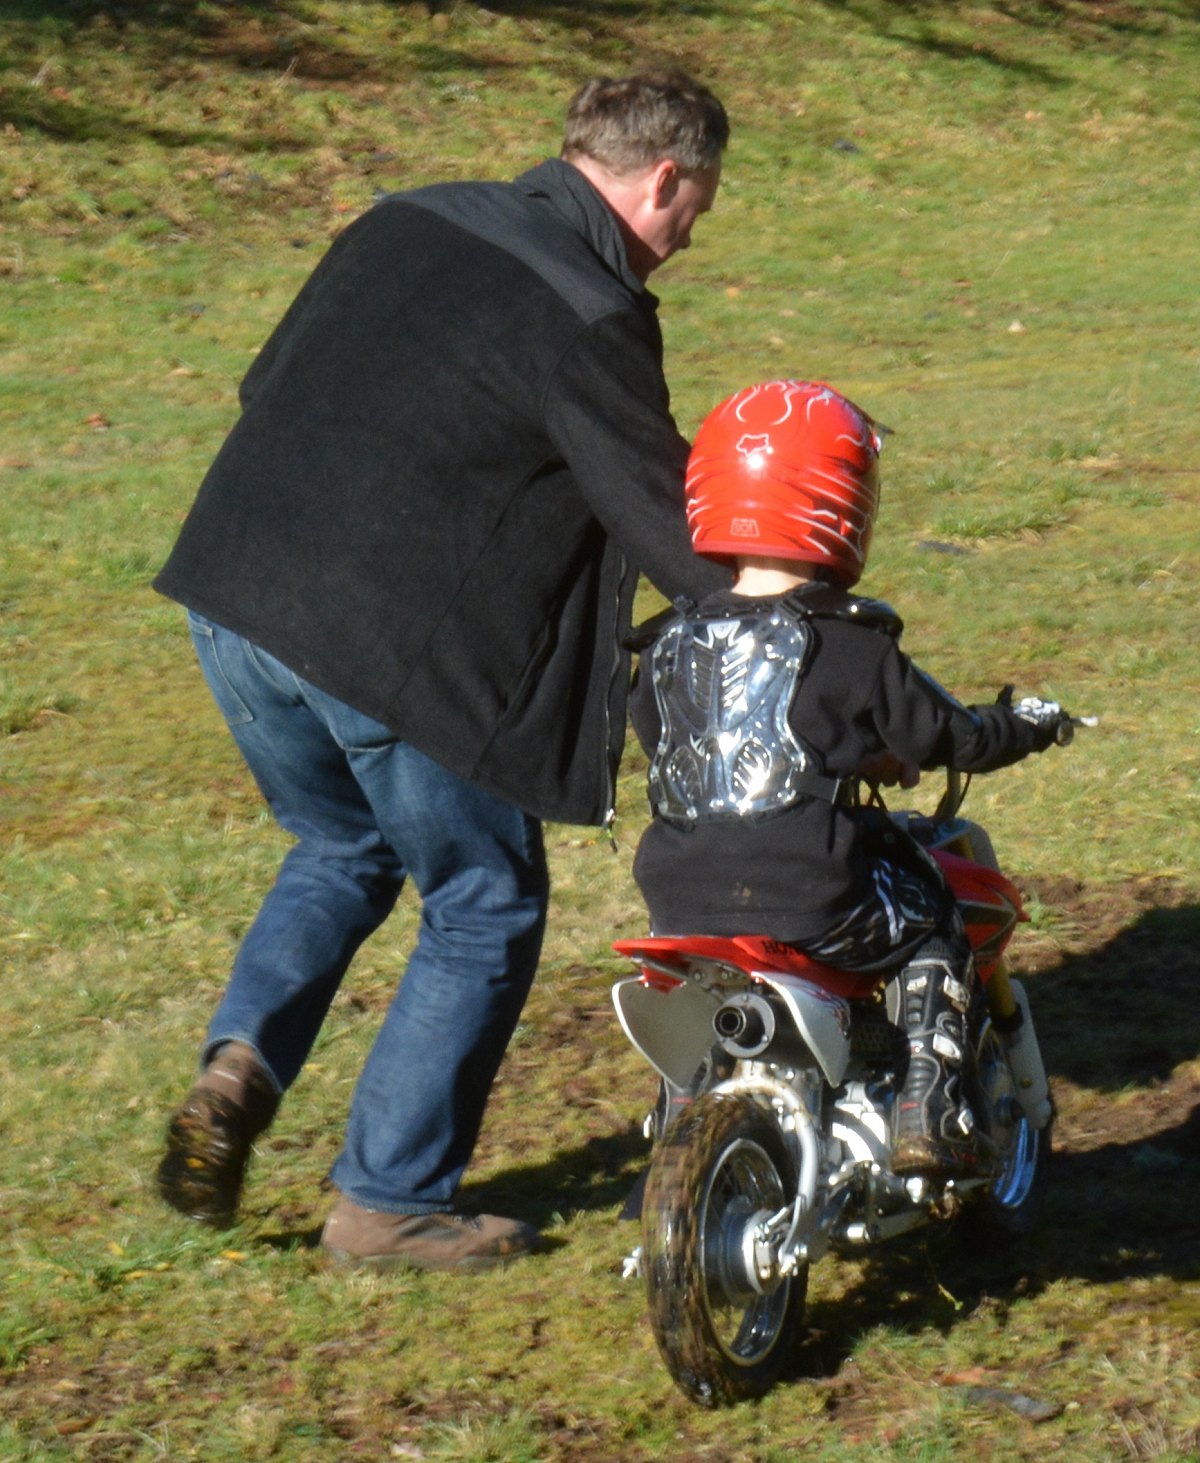 Ben's turn again - from the Dirt Biking with Miriam and Rodney photo gallery.